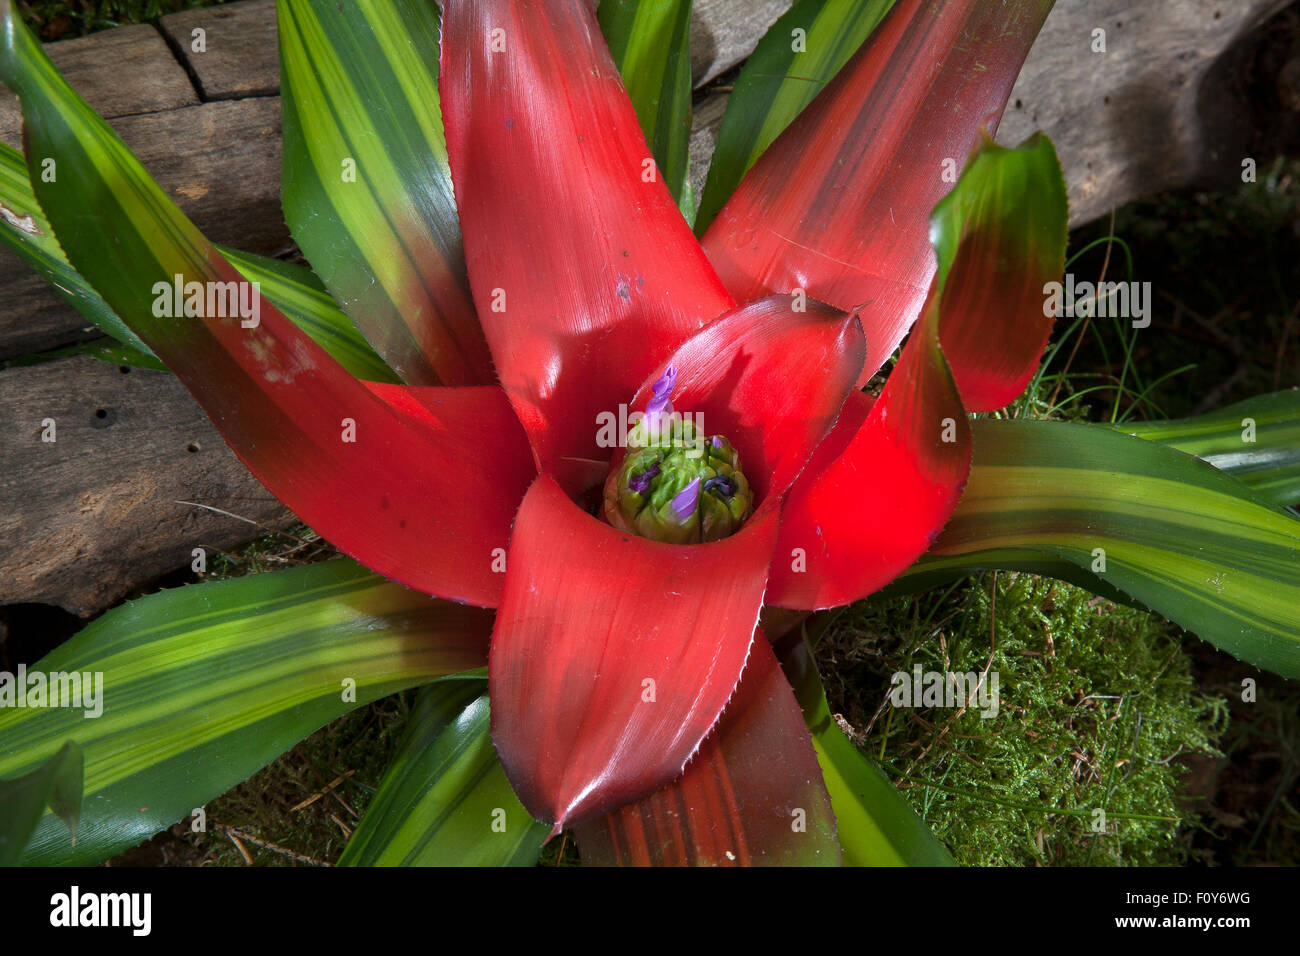 Southport, Merseyside, UK. 23rd August, 2015. Award Winning display of Neoregelia carolinae 'Tricolor' bromeliads at Southport flower show, Britain's biggest independent flower show, celebrates with a carnival-like celebration of all things Chinese. Oriental themed events, entertainment, food and floral marquees all inspired by Chinese culture and design. Credit:  CernanElias/Alamy Live News. Stock Photo